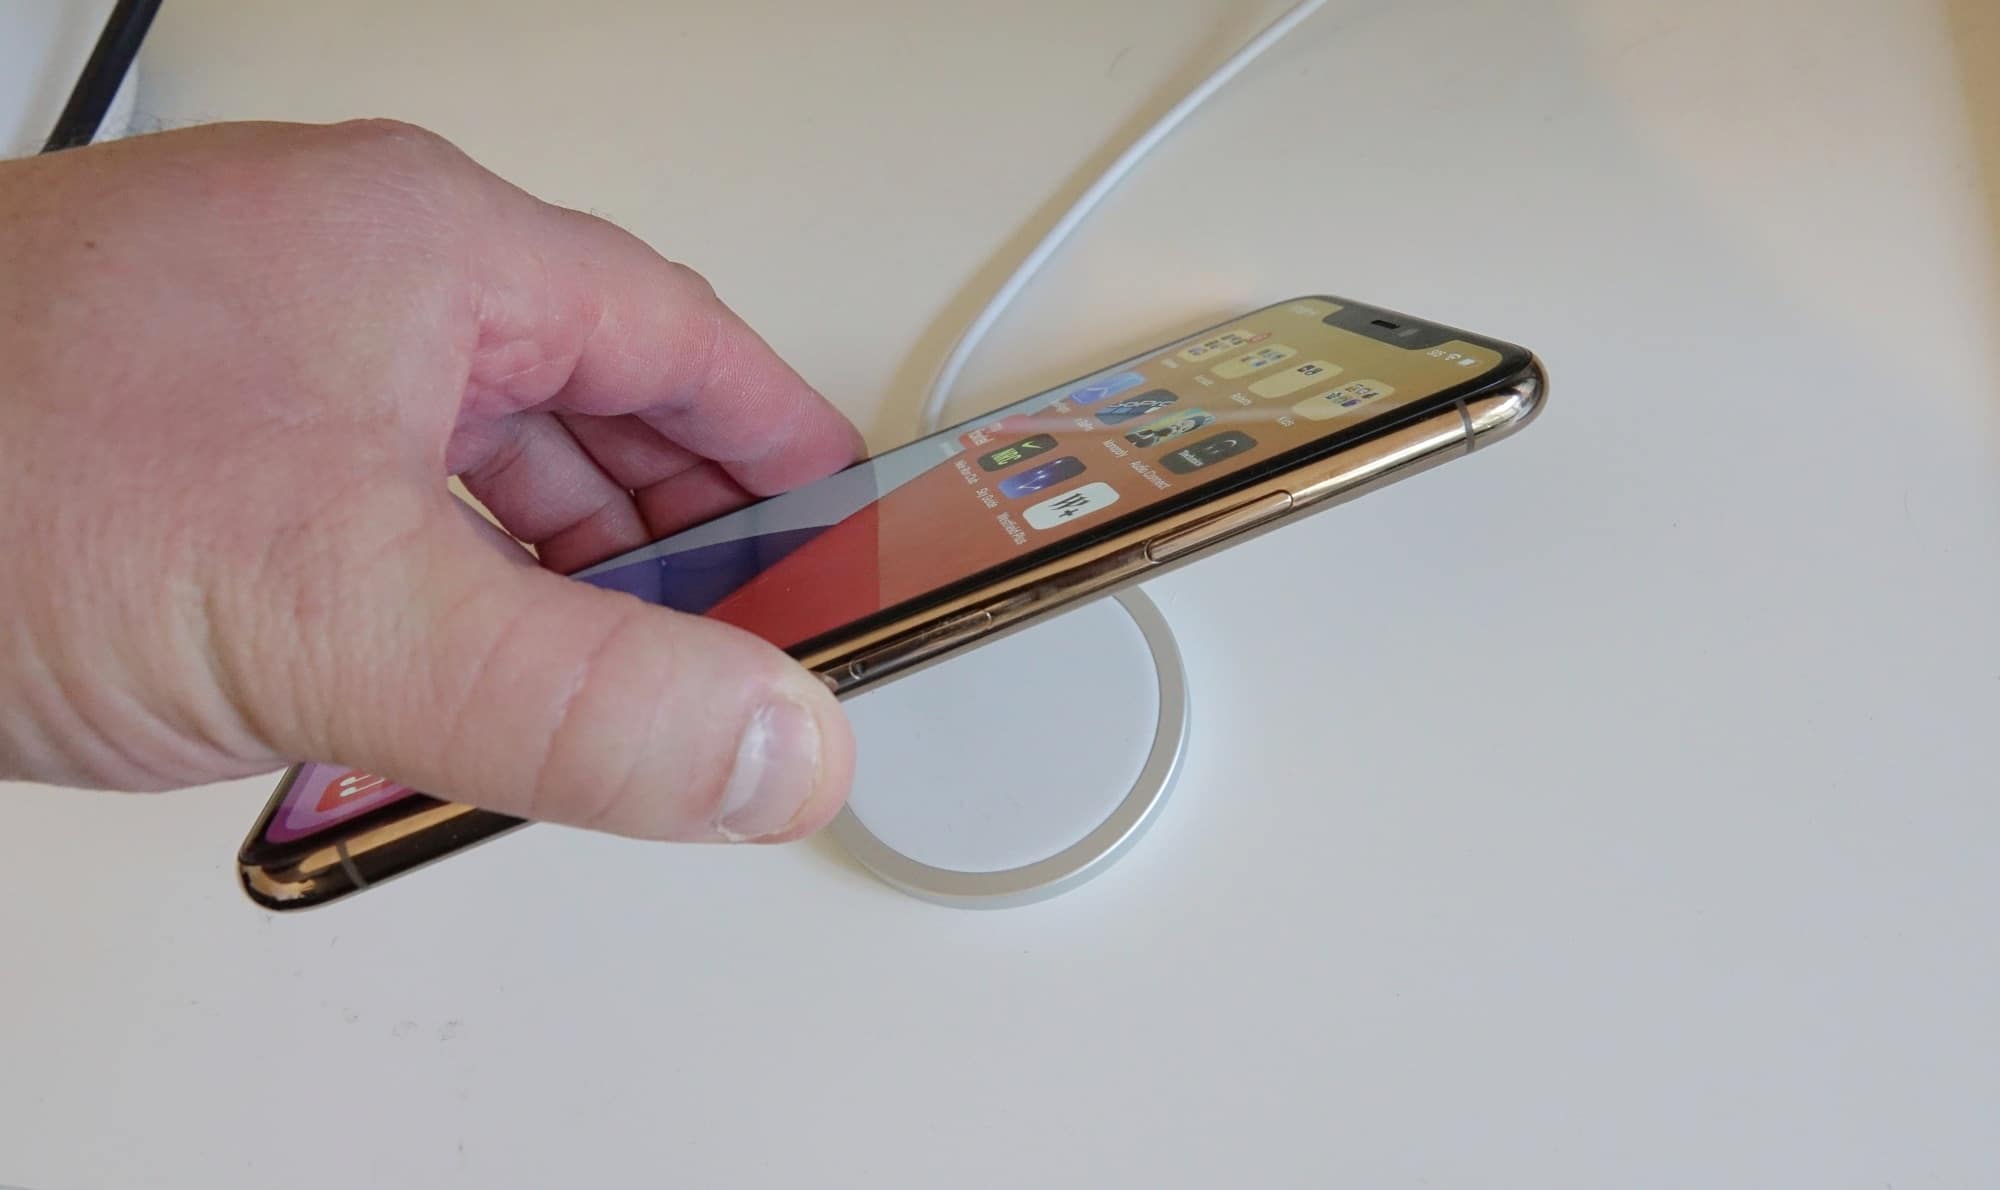 You can charge an iPhone 11 Pro Max on a MagSafe charger, but it won't cling to the back.